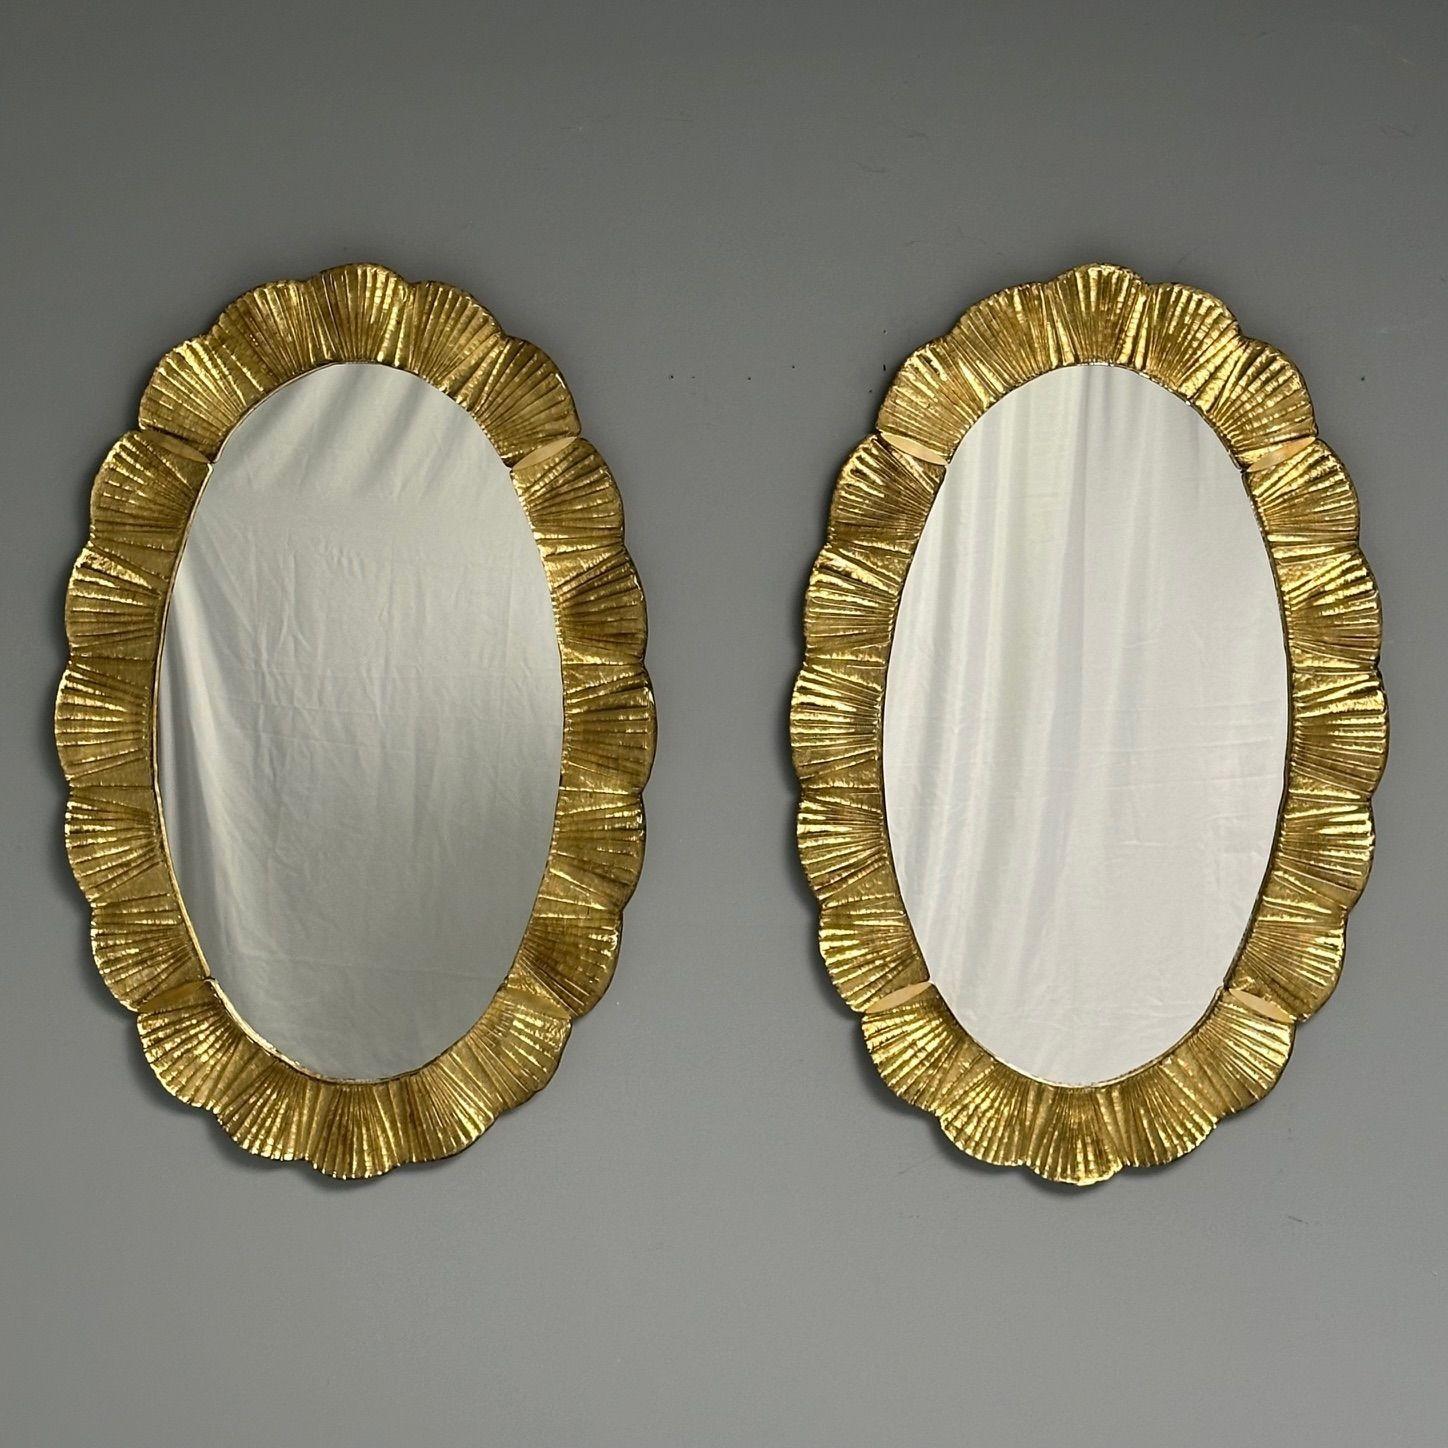 Modern Contemporary, Oval Wall Mirrors, Scallop Motif, Murano Glass, Gilt Gold, Italy For Sale